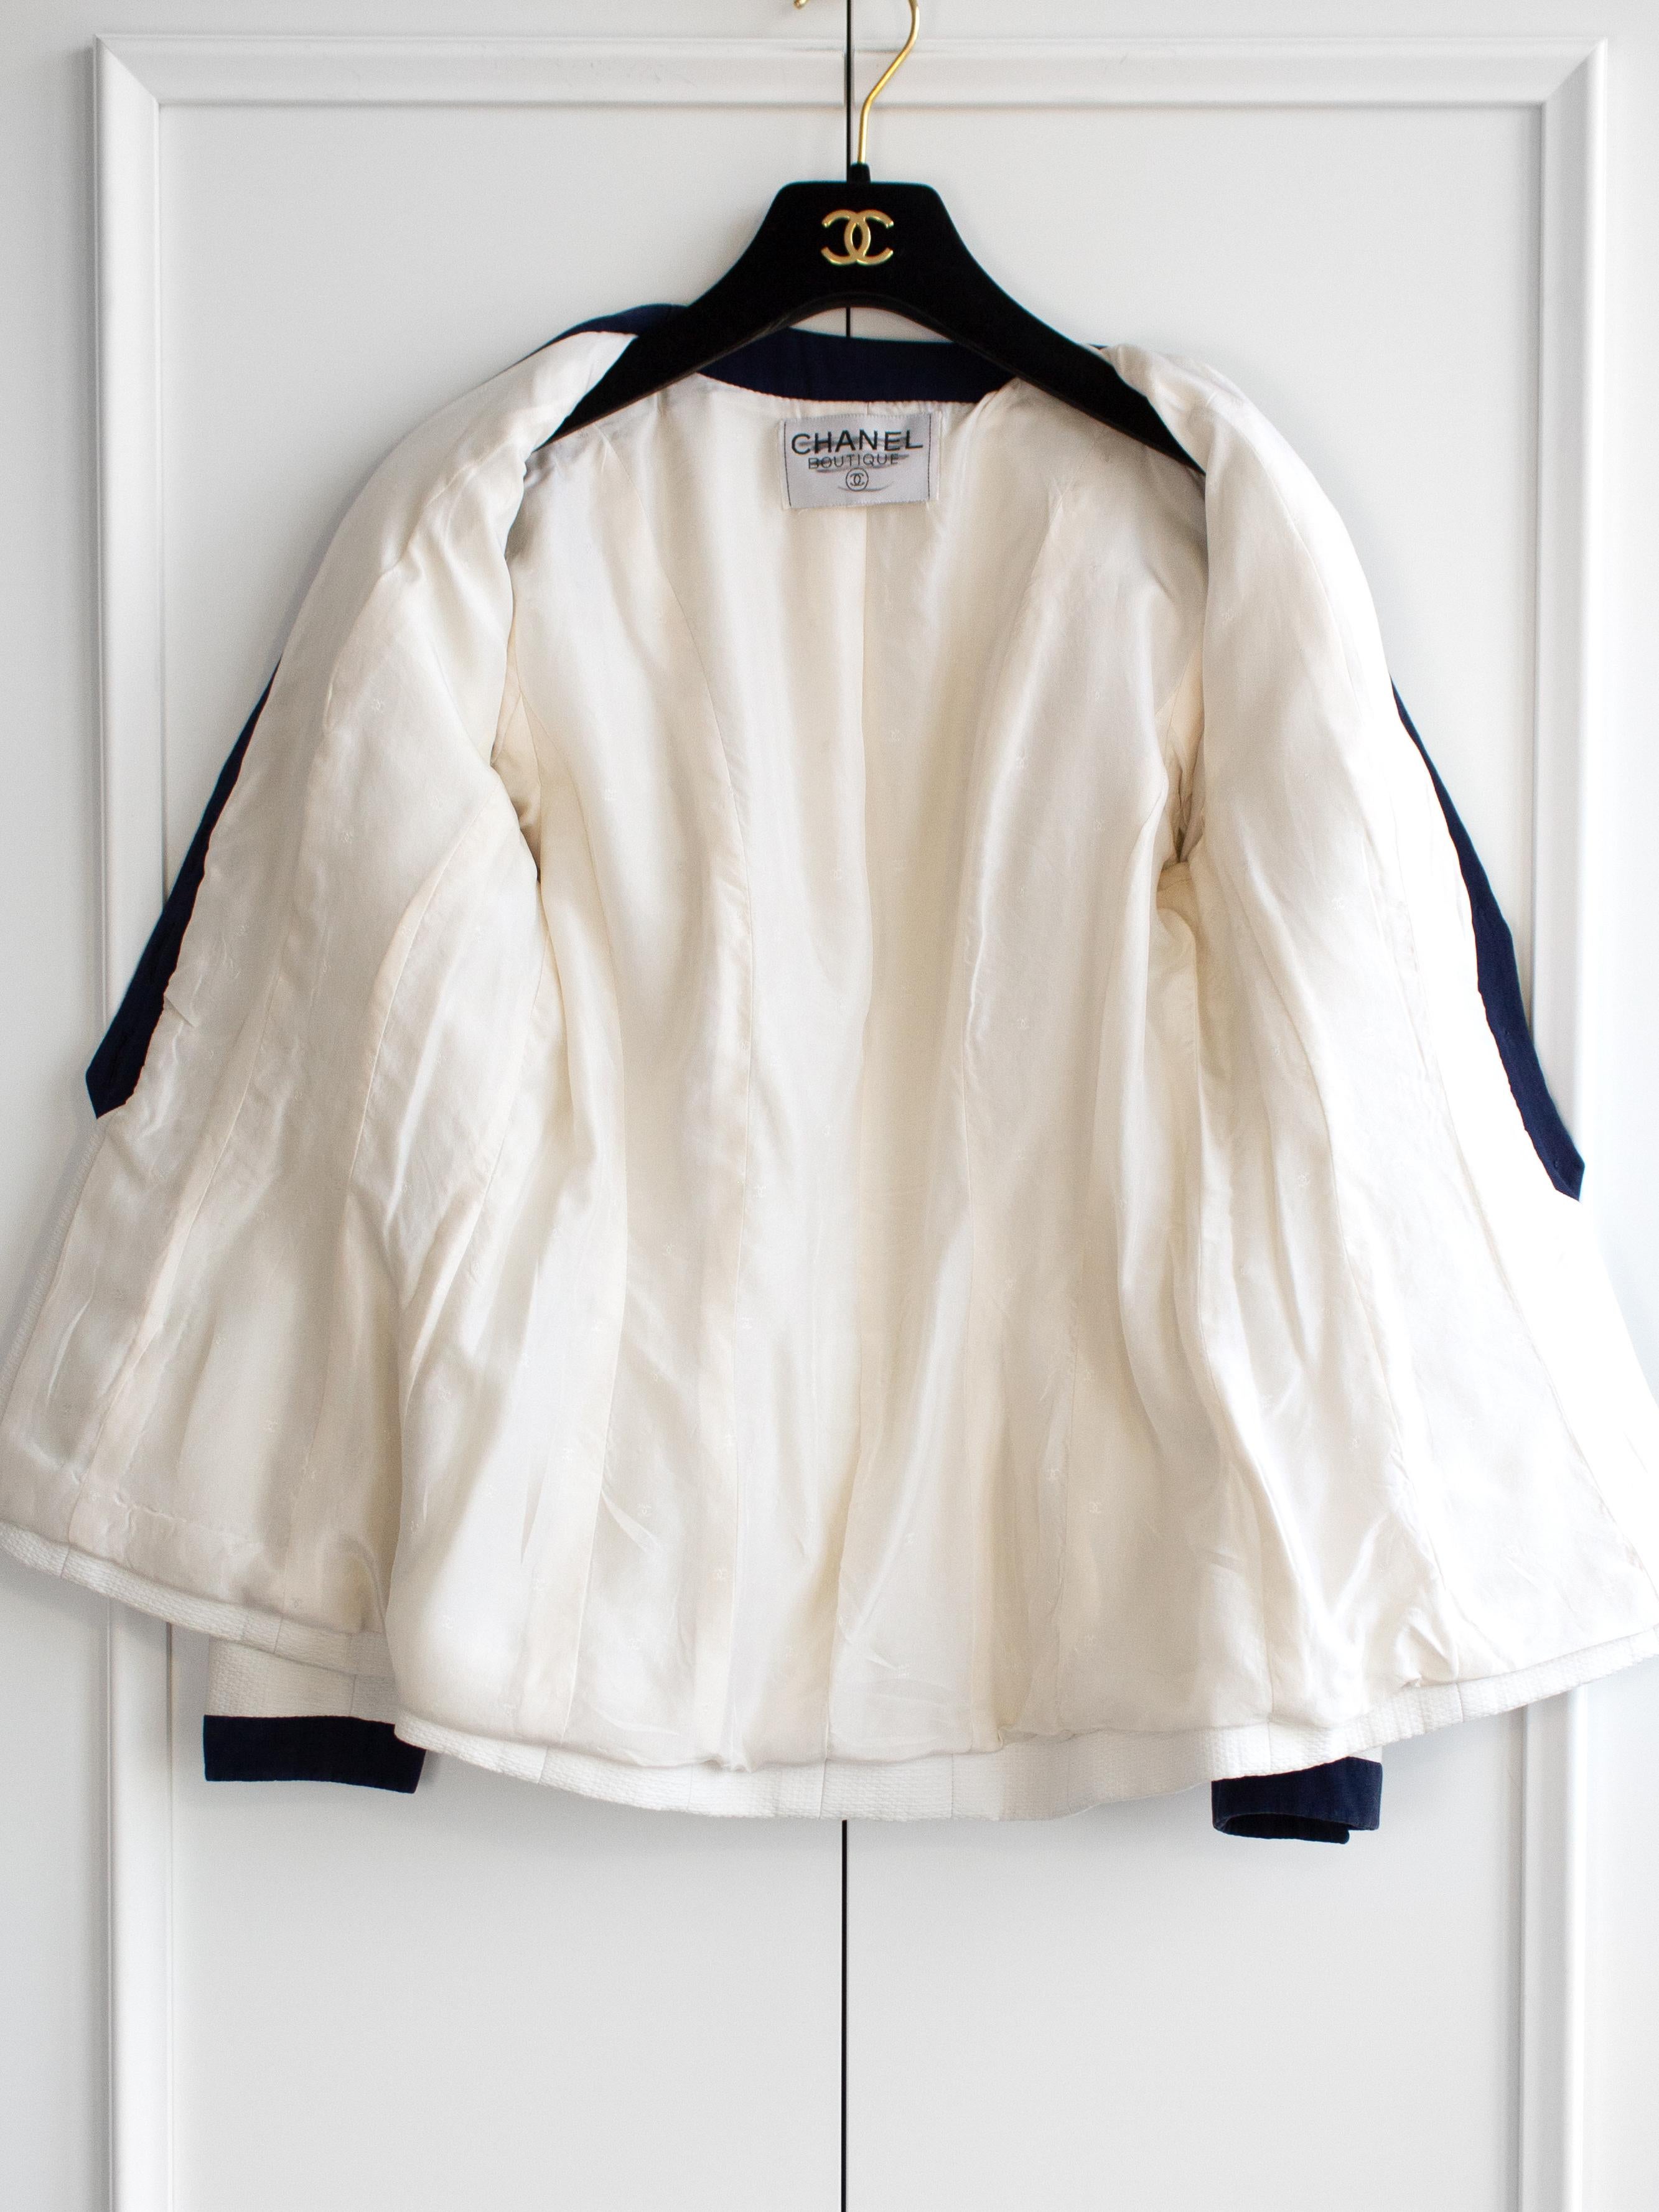 Chanel Vintage S/S 1992 Runway White Navy Lucite Gold Camellia Cotton Jacket 7